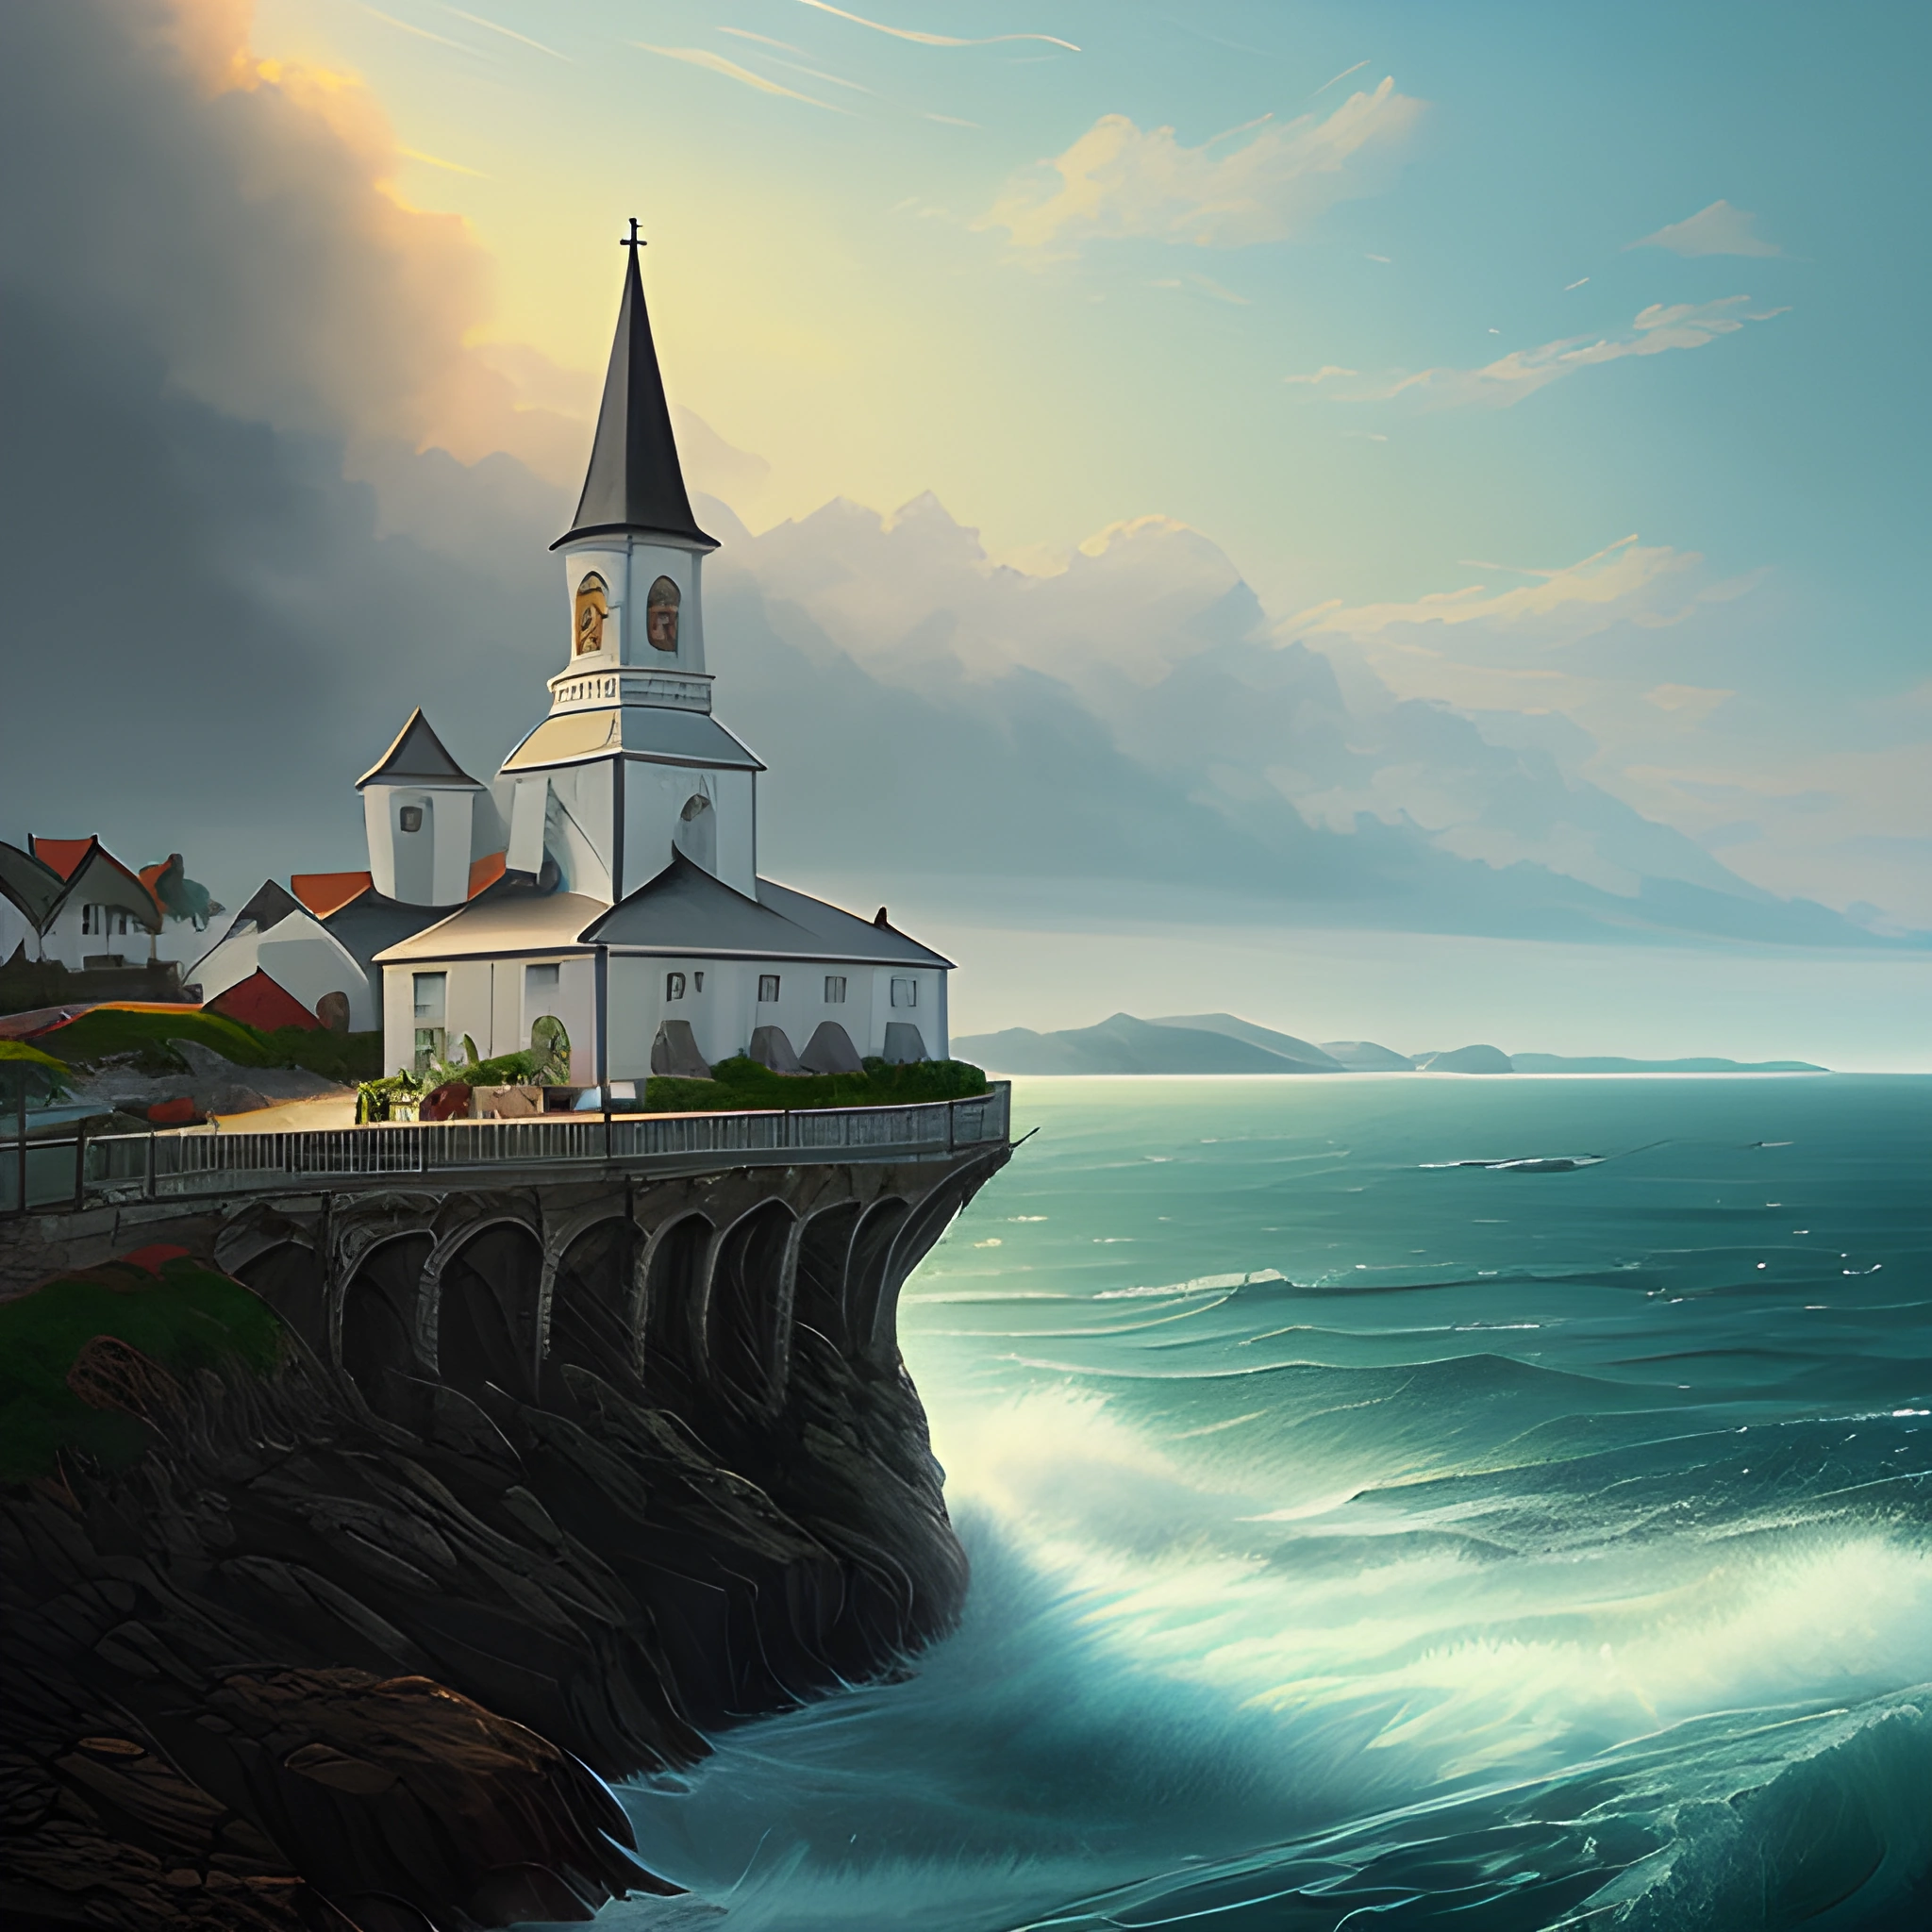 painting of a church on a cliff overlooking the ocean